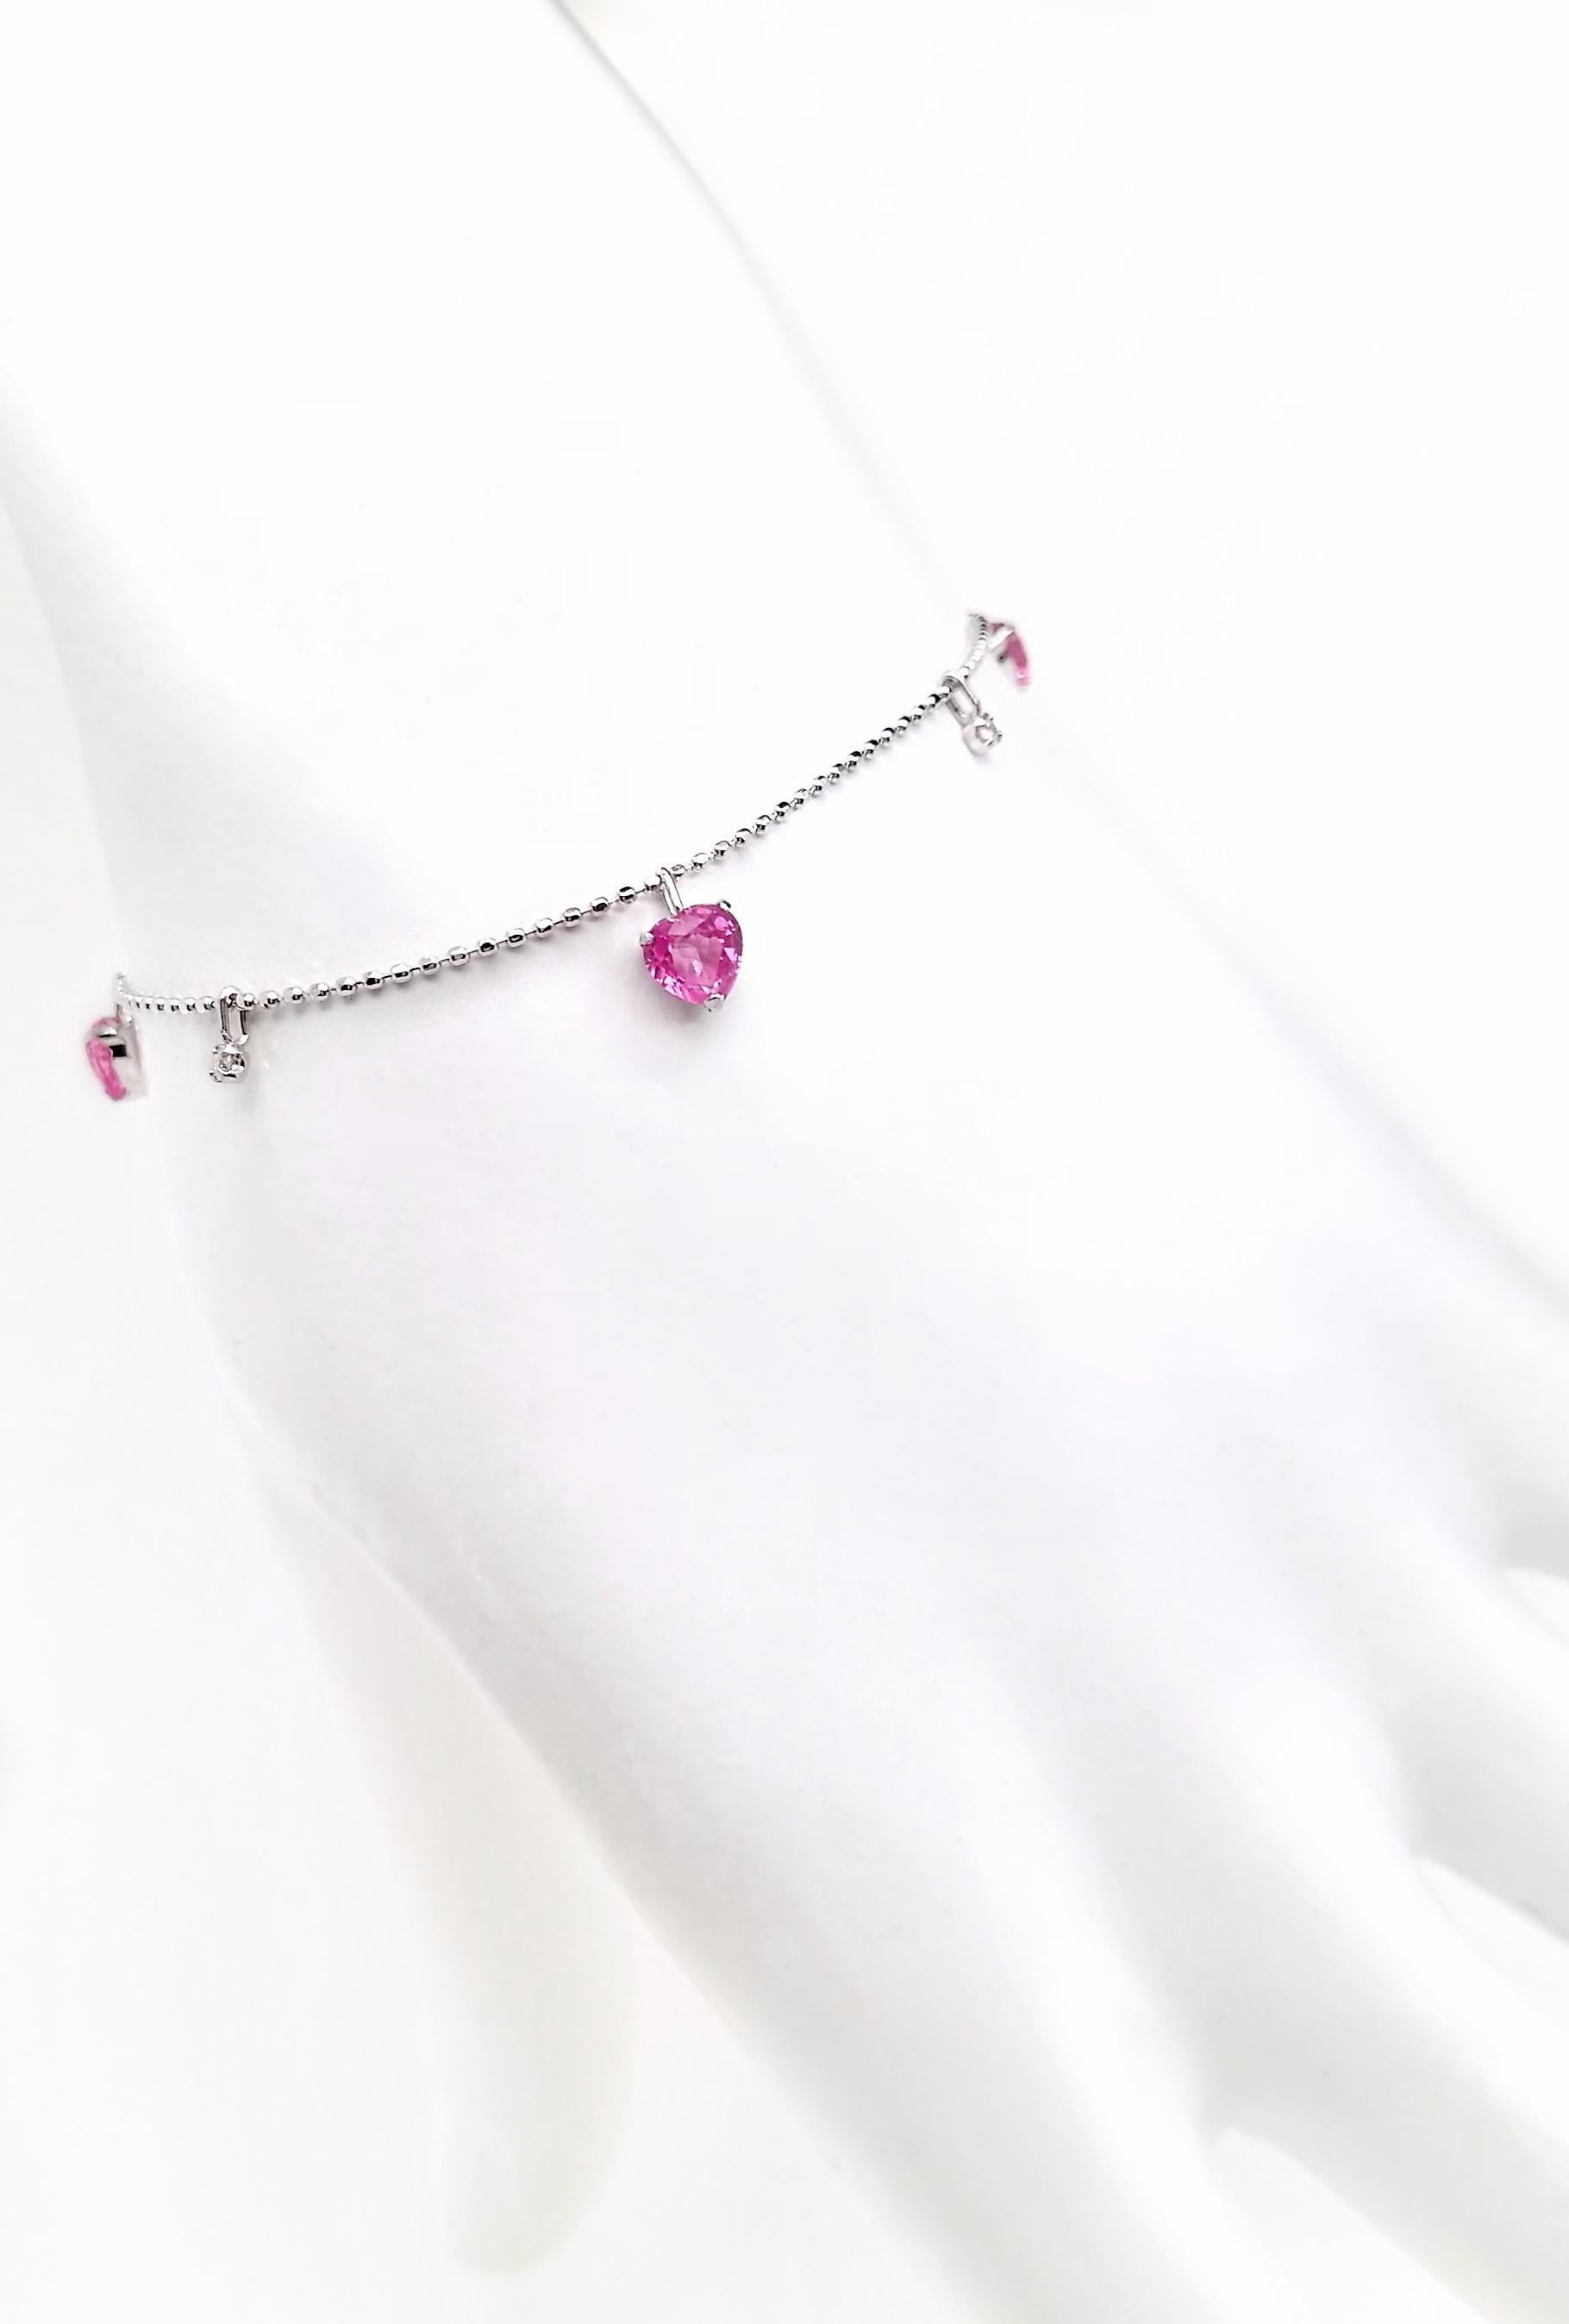 Enchant with charm wearing our elegant Top Crown Jewelry Collection of 18K White Gold Bracelet featuring a 1.00ct IGI Certified Heart-Shaped mixed-cut Pink Sapphires and sparkling 0.06ct natural diamonds.

This ring is certified by IGI laboratory,